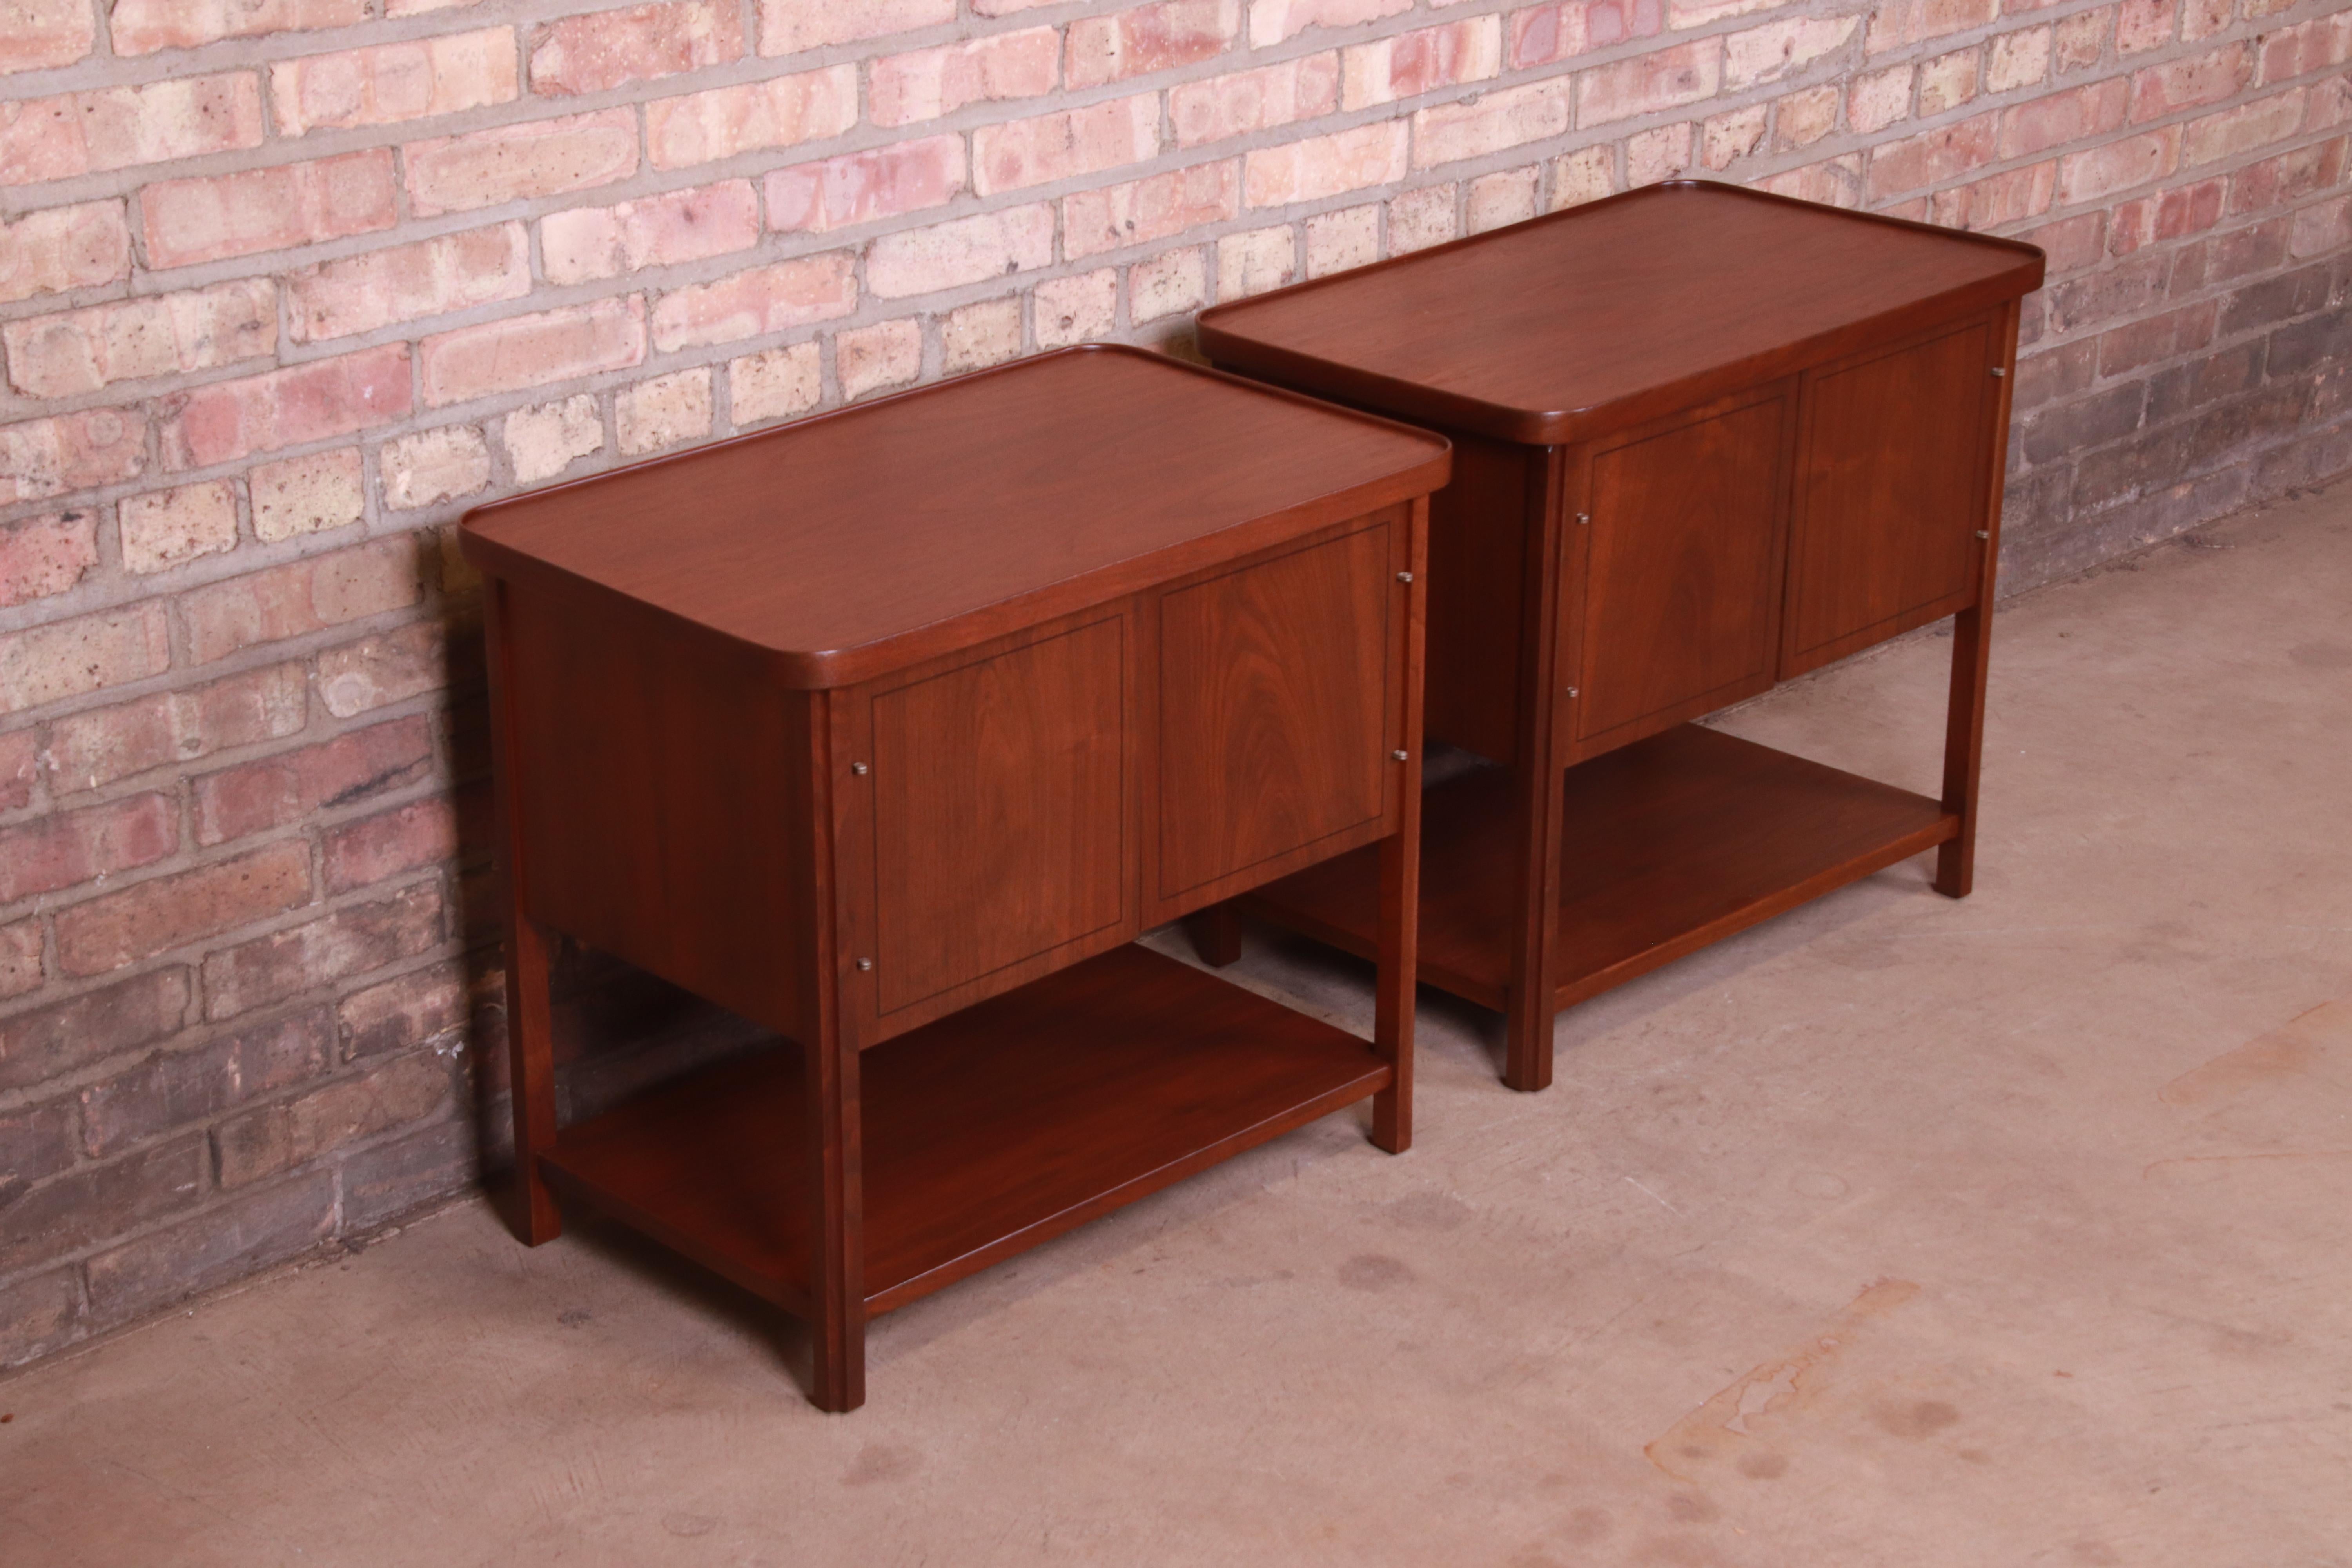 Mid-20th Century Jack Cartwright for Founders Mid-Century Modern Walnut Nightstands, Refinished